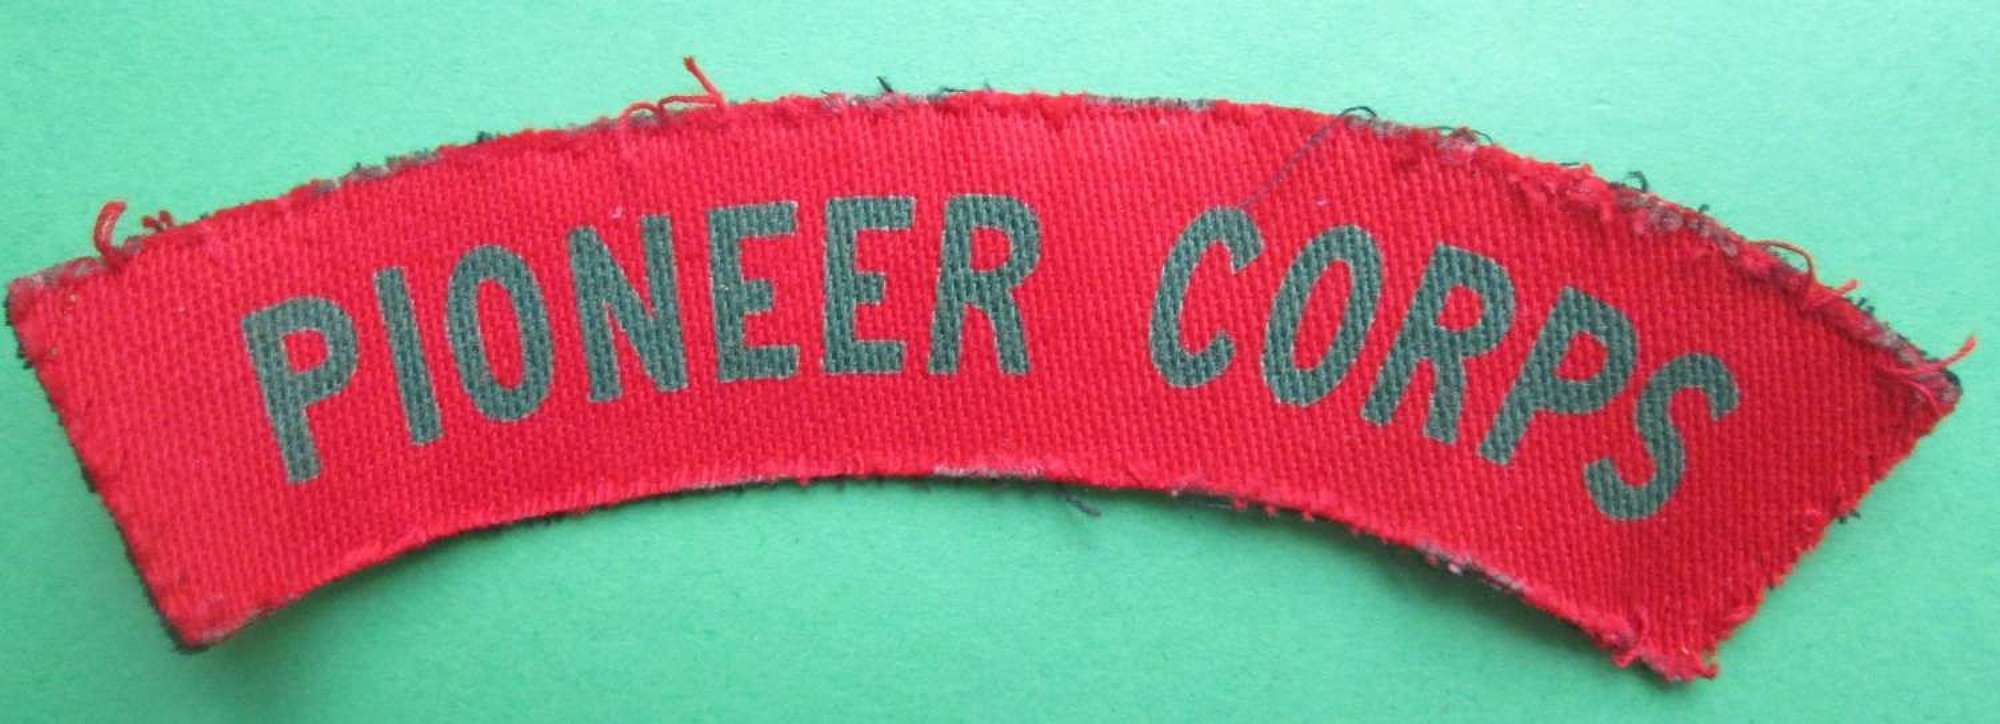 A GOOD USED EXAMPLE OF THE WWII PIONEER CORPS SHOULDER TITLE